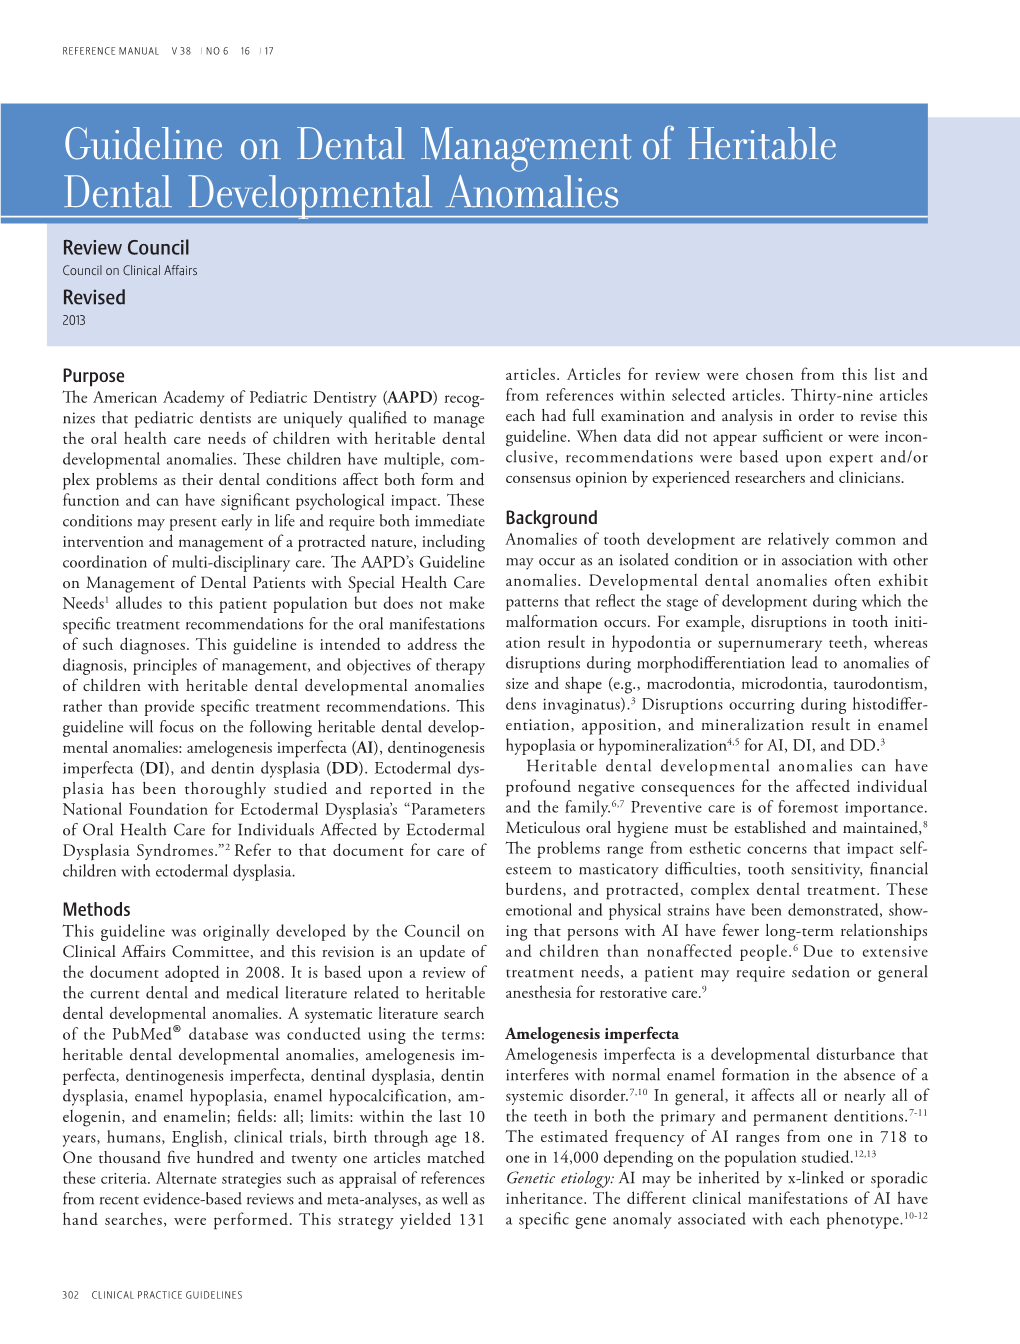 Guideline on Dental Management of Heritable Dental Developmental Anomalies Review Council Council on Clinical Affairs Revised 2013